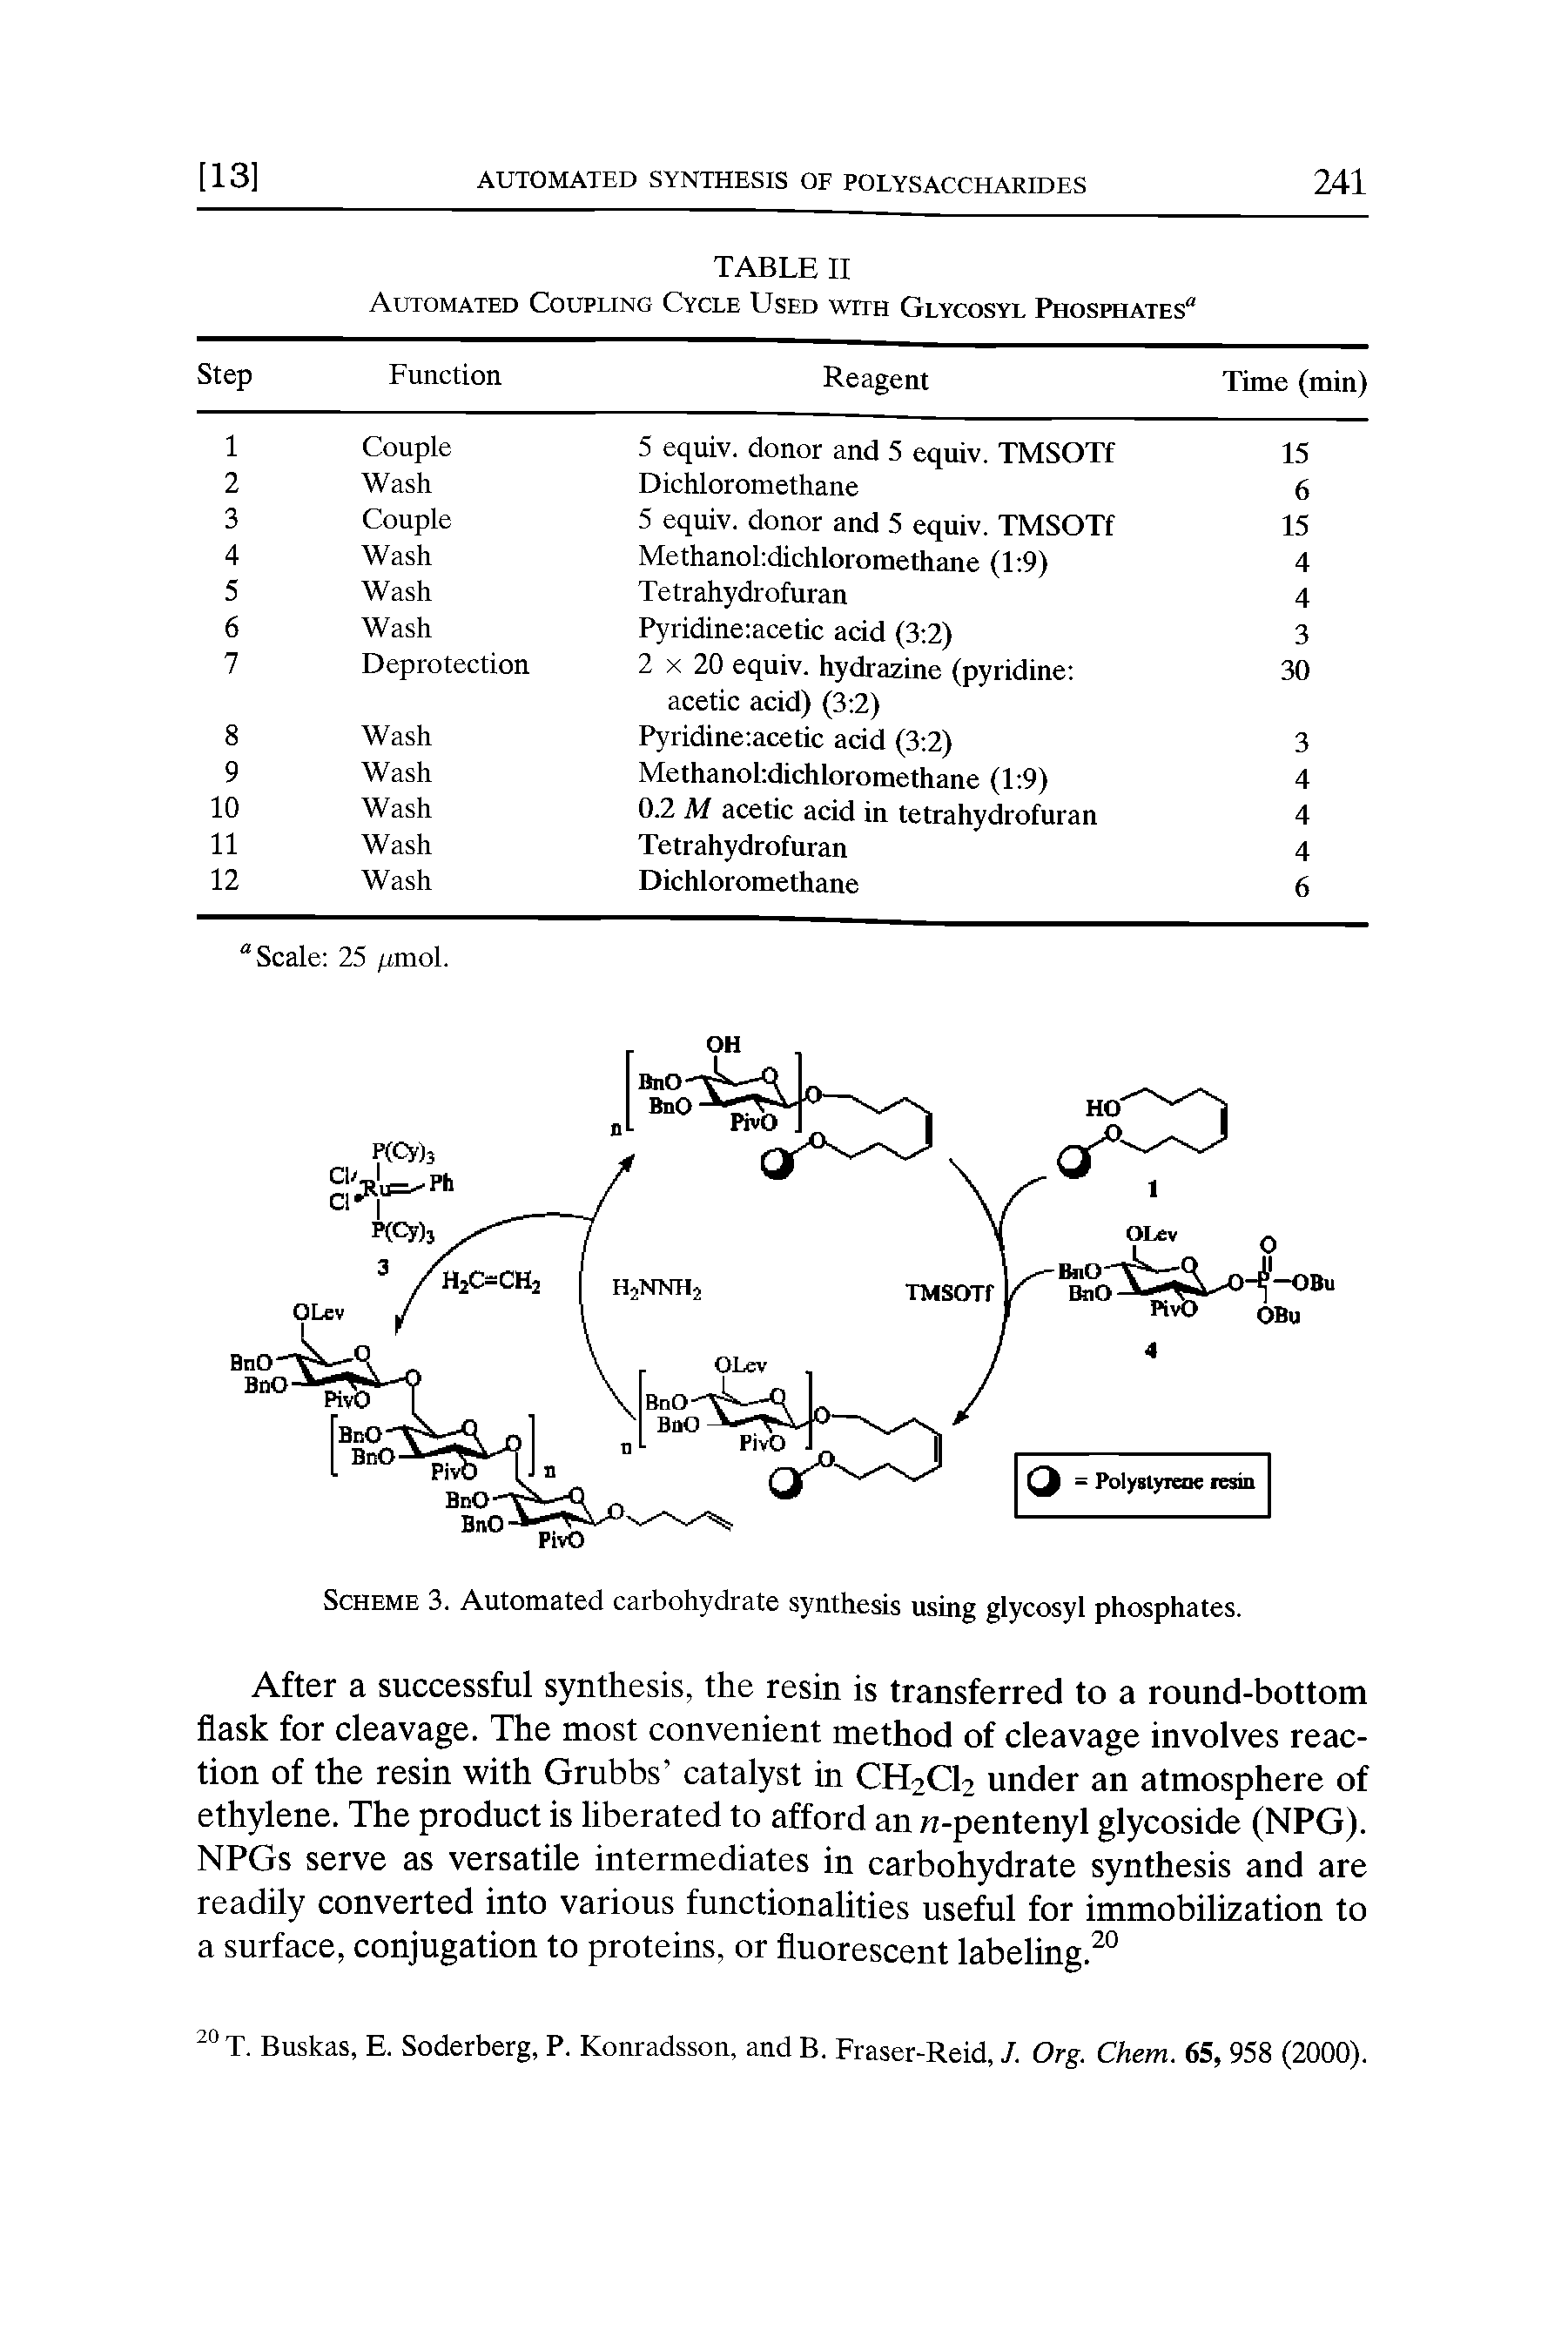 Scheme 3. Automated carbohydrate synthesis using glycosyl phosphates.